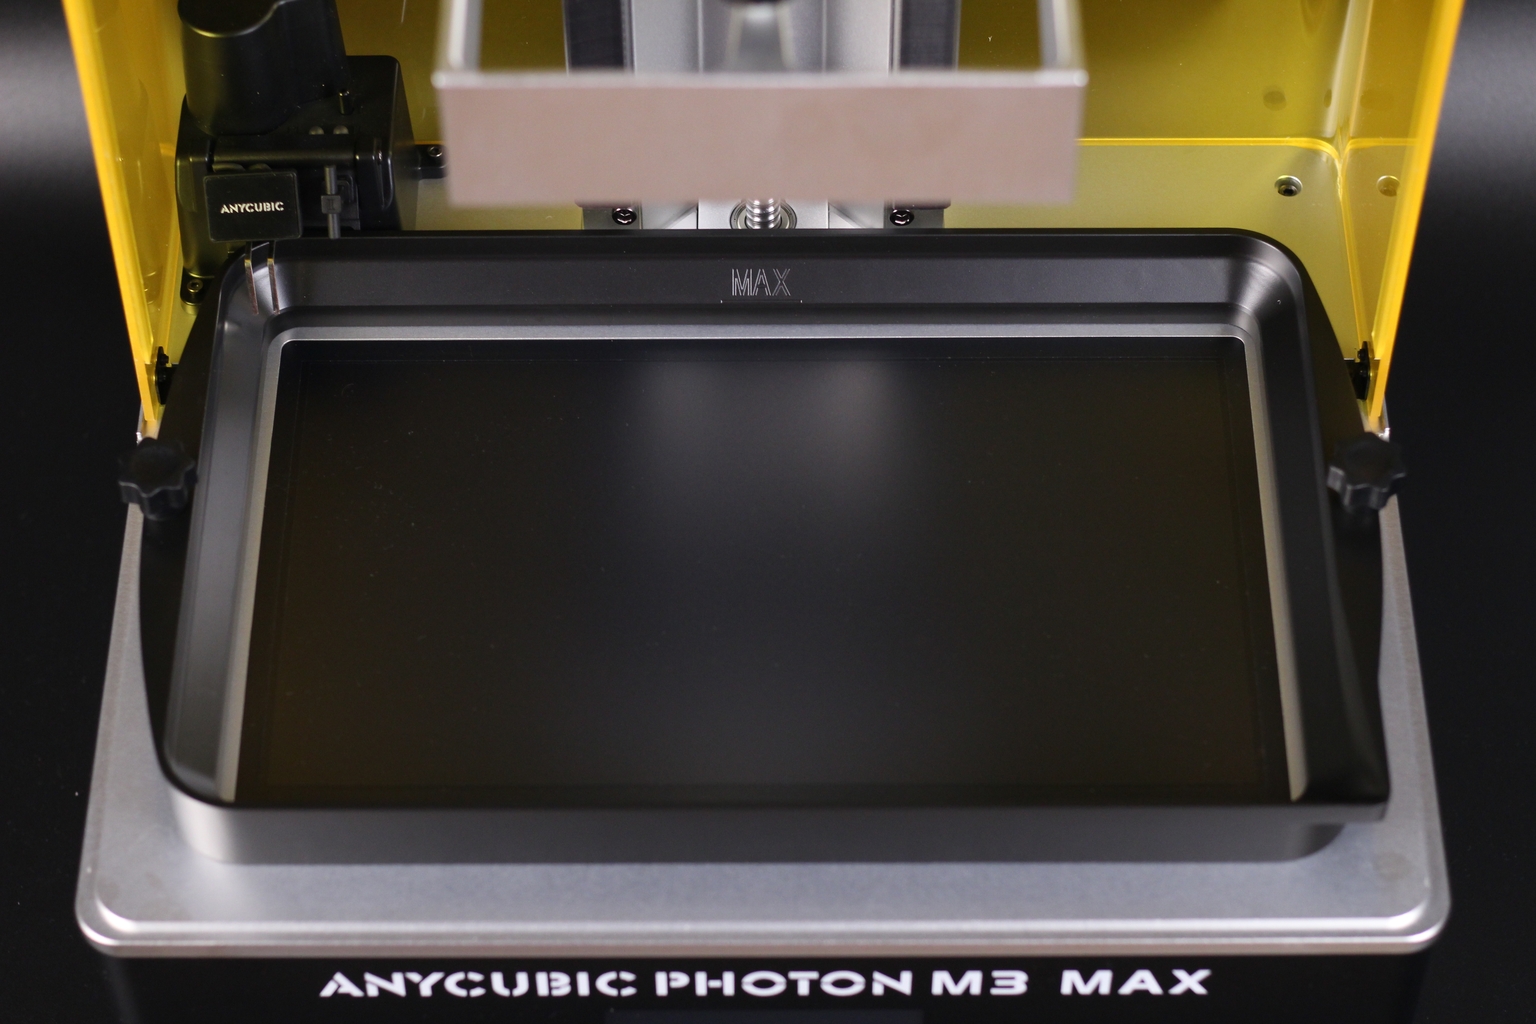 Anycubic M3 Max Metallic Vat | Anycubic Photon M3 Max Review: Who Needs FDM Anymore?